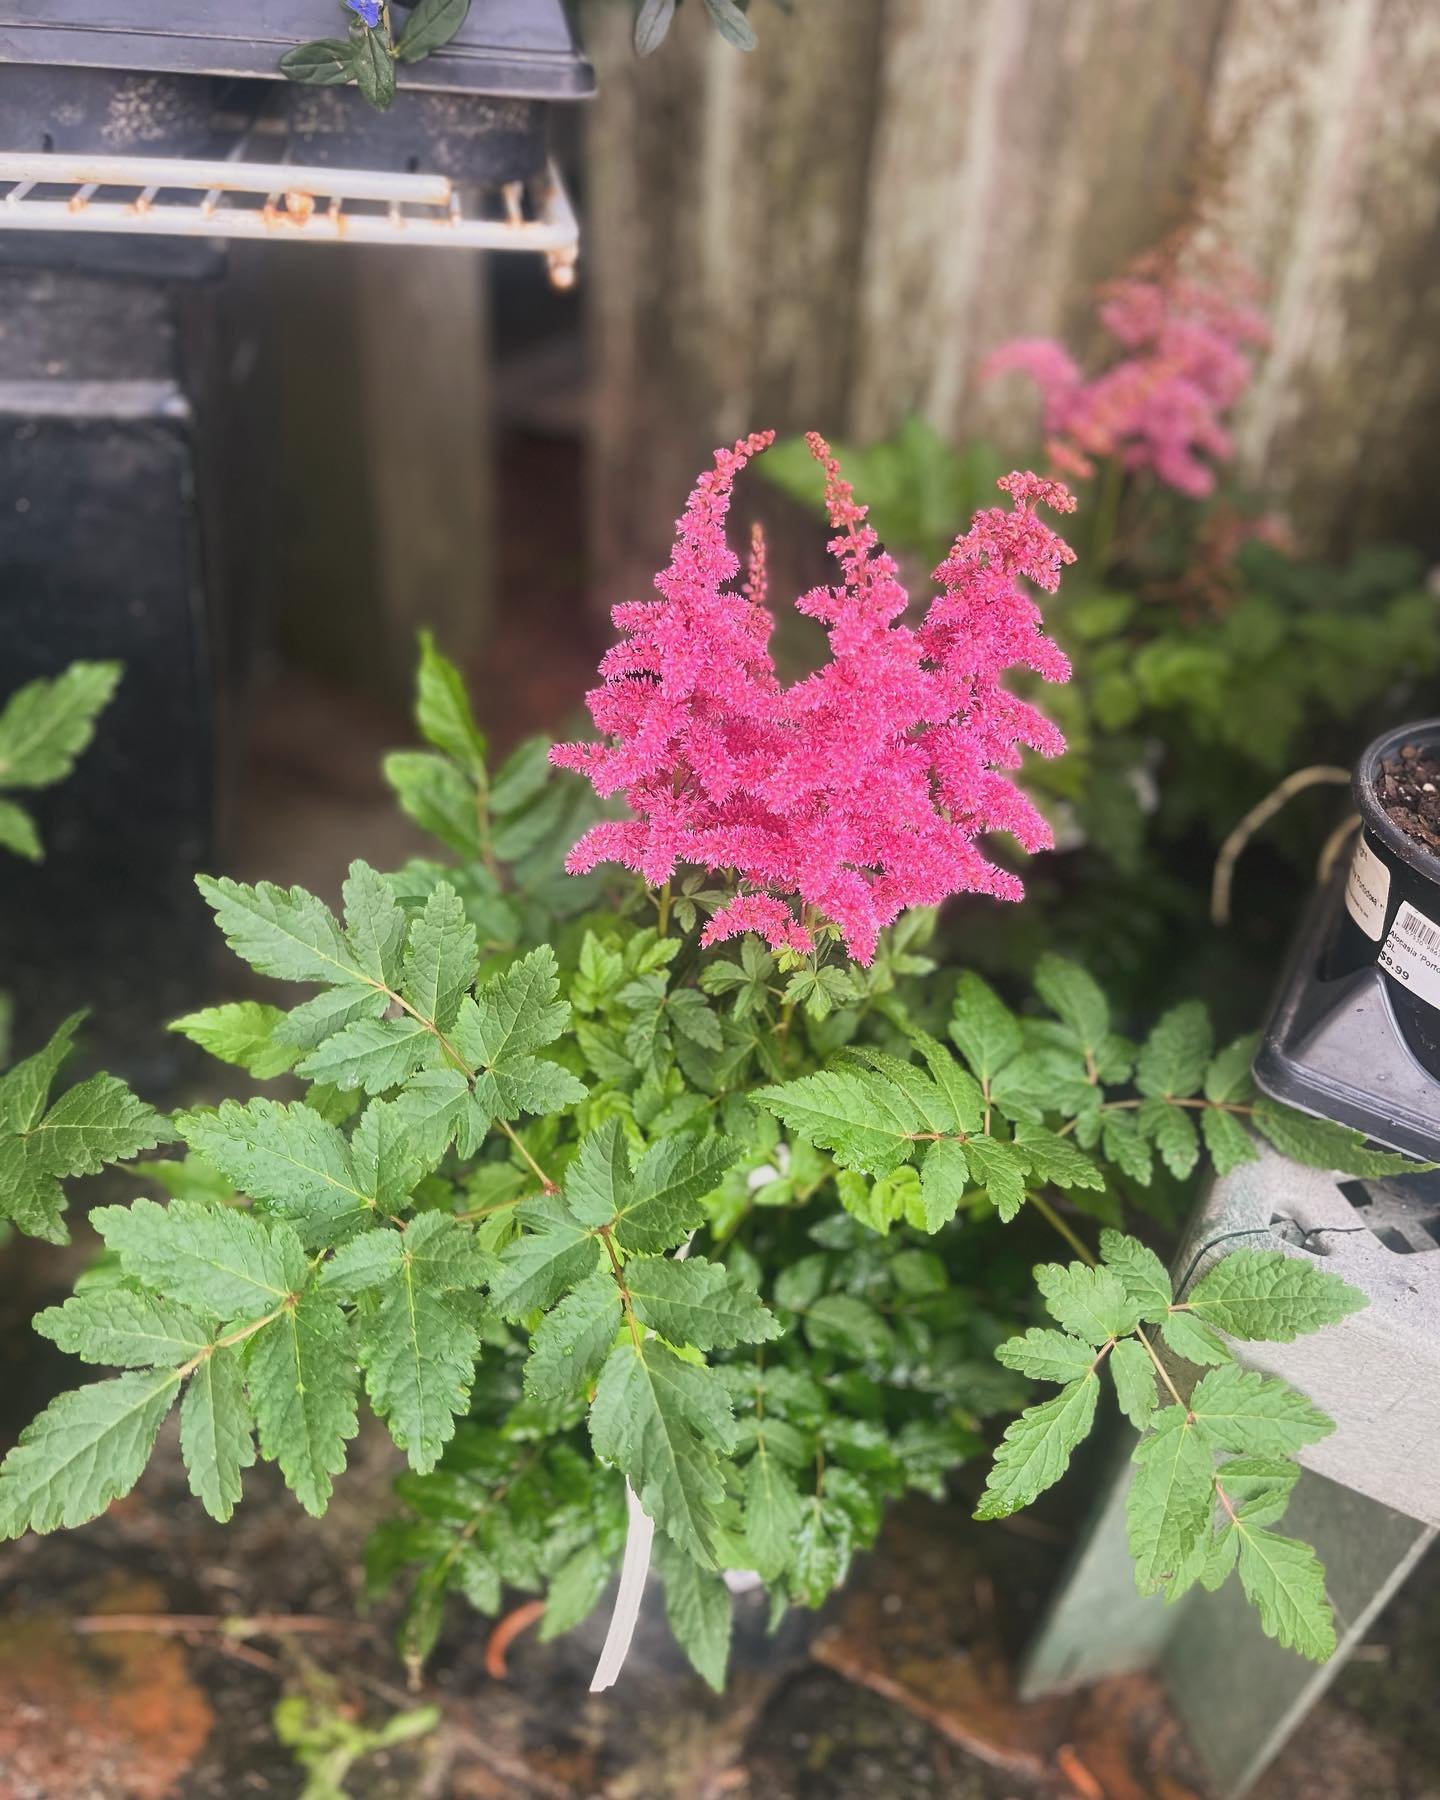 Looking for a shady perennial plant with lots of texture?

Astilbe grows best in afternoon shade and thrives in moist, well-drained soil, and blooms in various shades of pink and white here at Smith&rsquo;s. 

It grows about 2-4 feet tall, with soft 